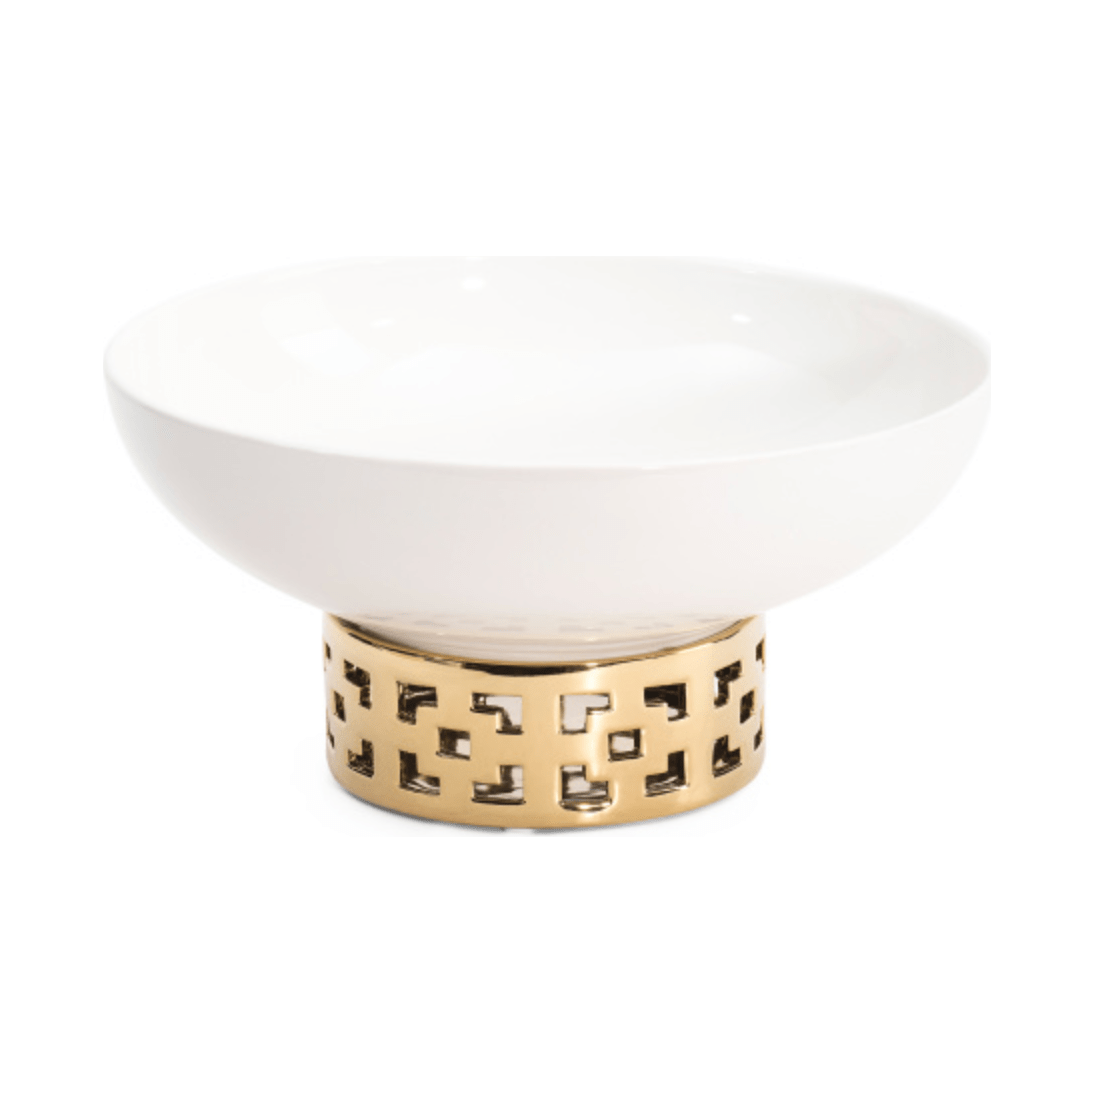 Extra-Large Bowl Stands at